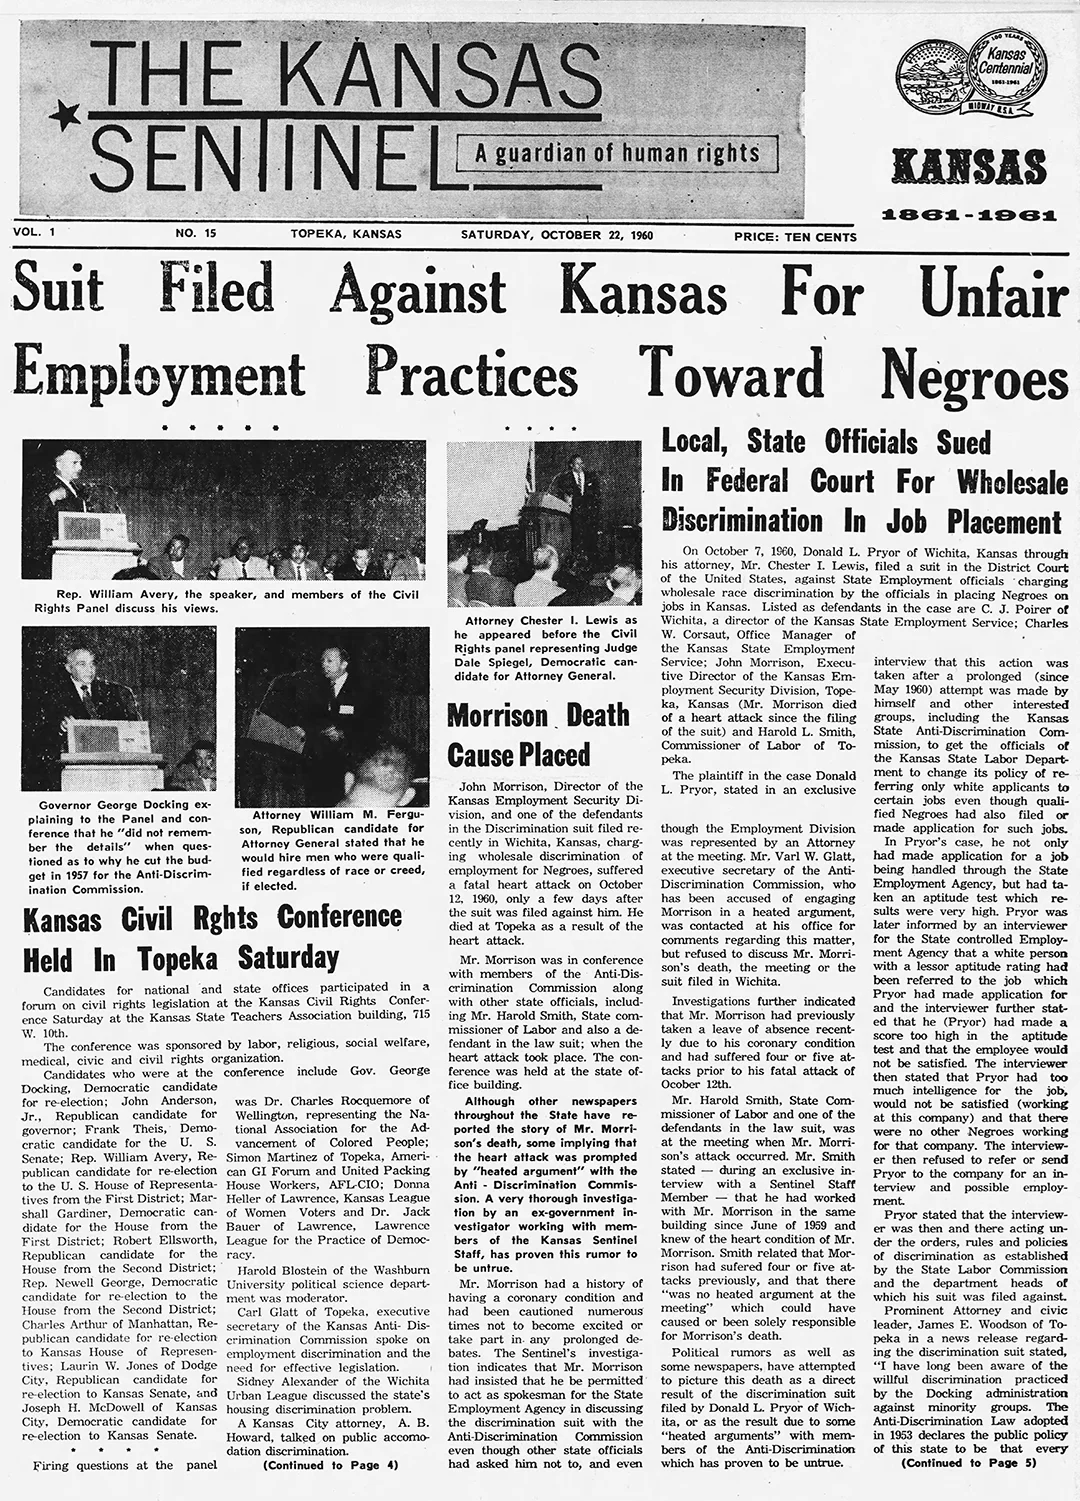 A newspaper clipping about a lawsuit filed against Kansas employment officials for discrimination